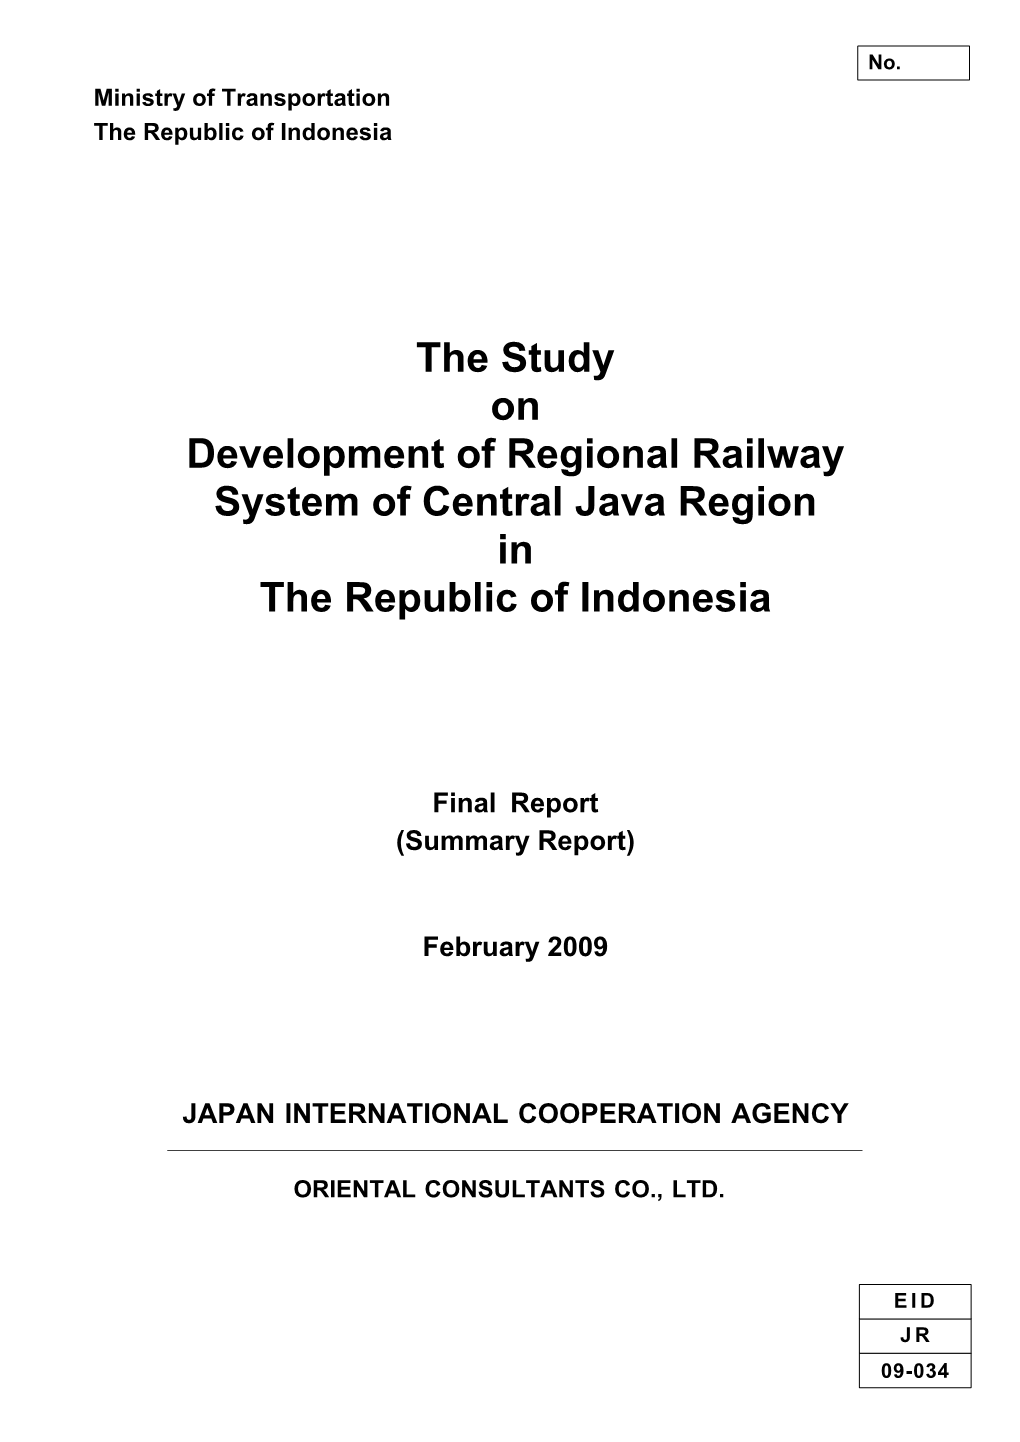 The Study on Development of Regional Railway System of Central Java Region in the Republic of Indonesia